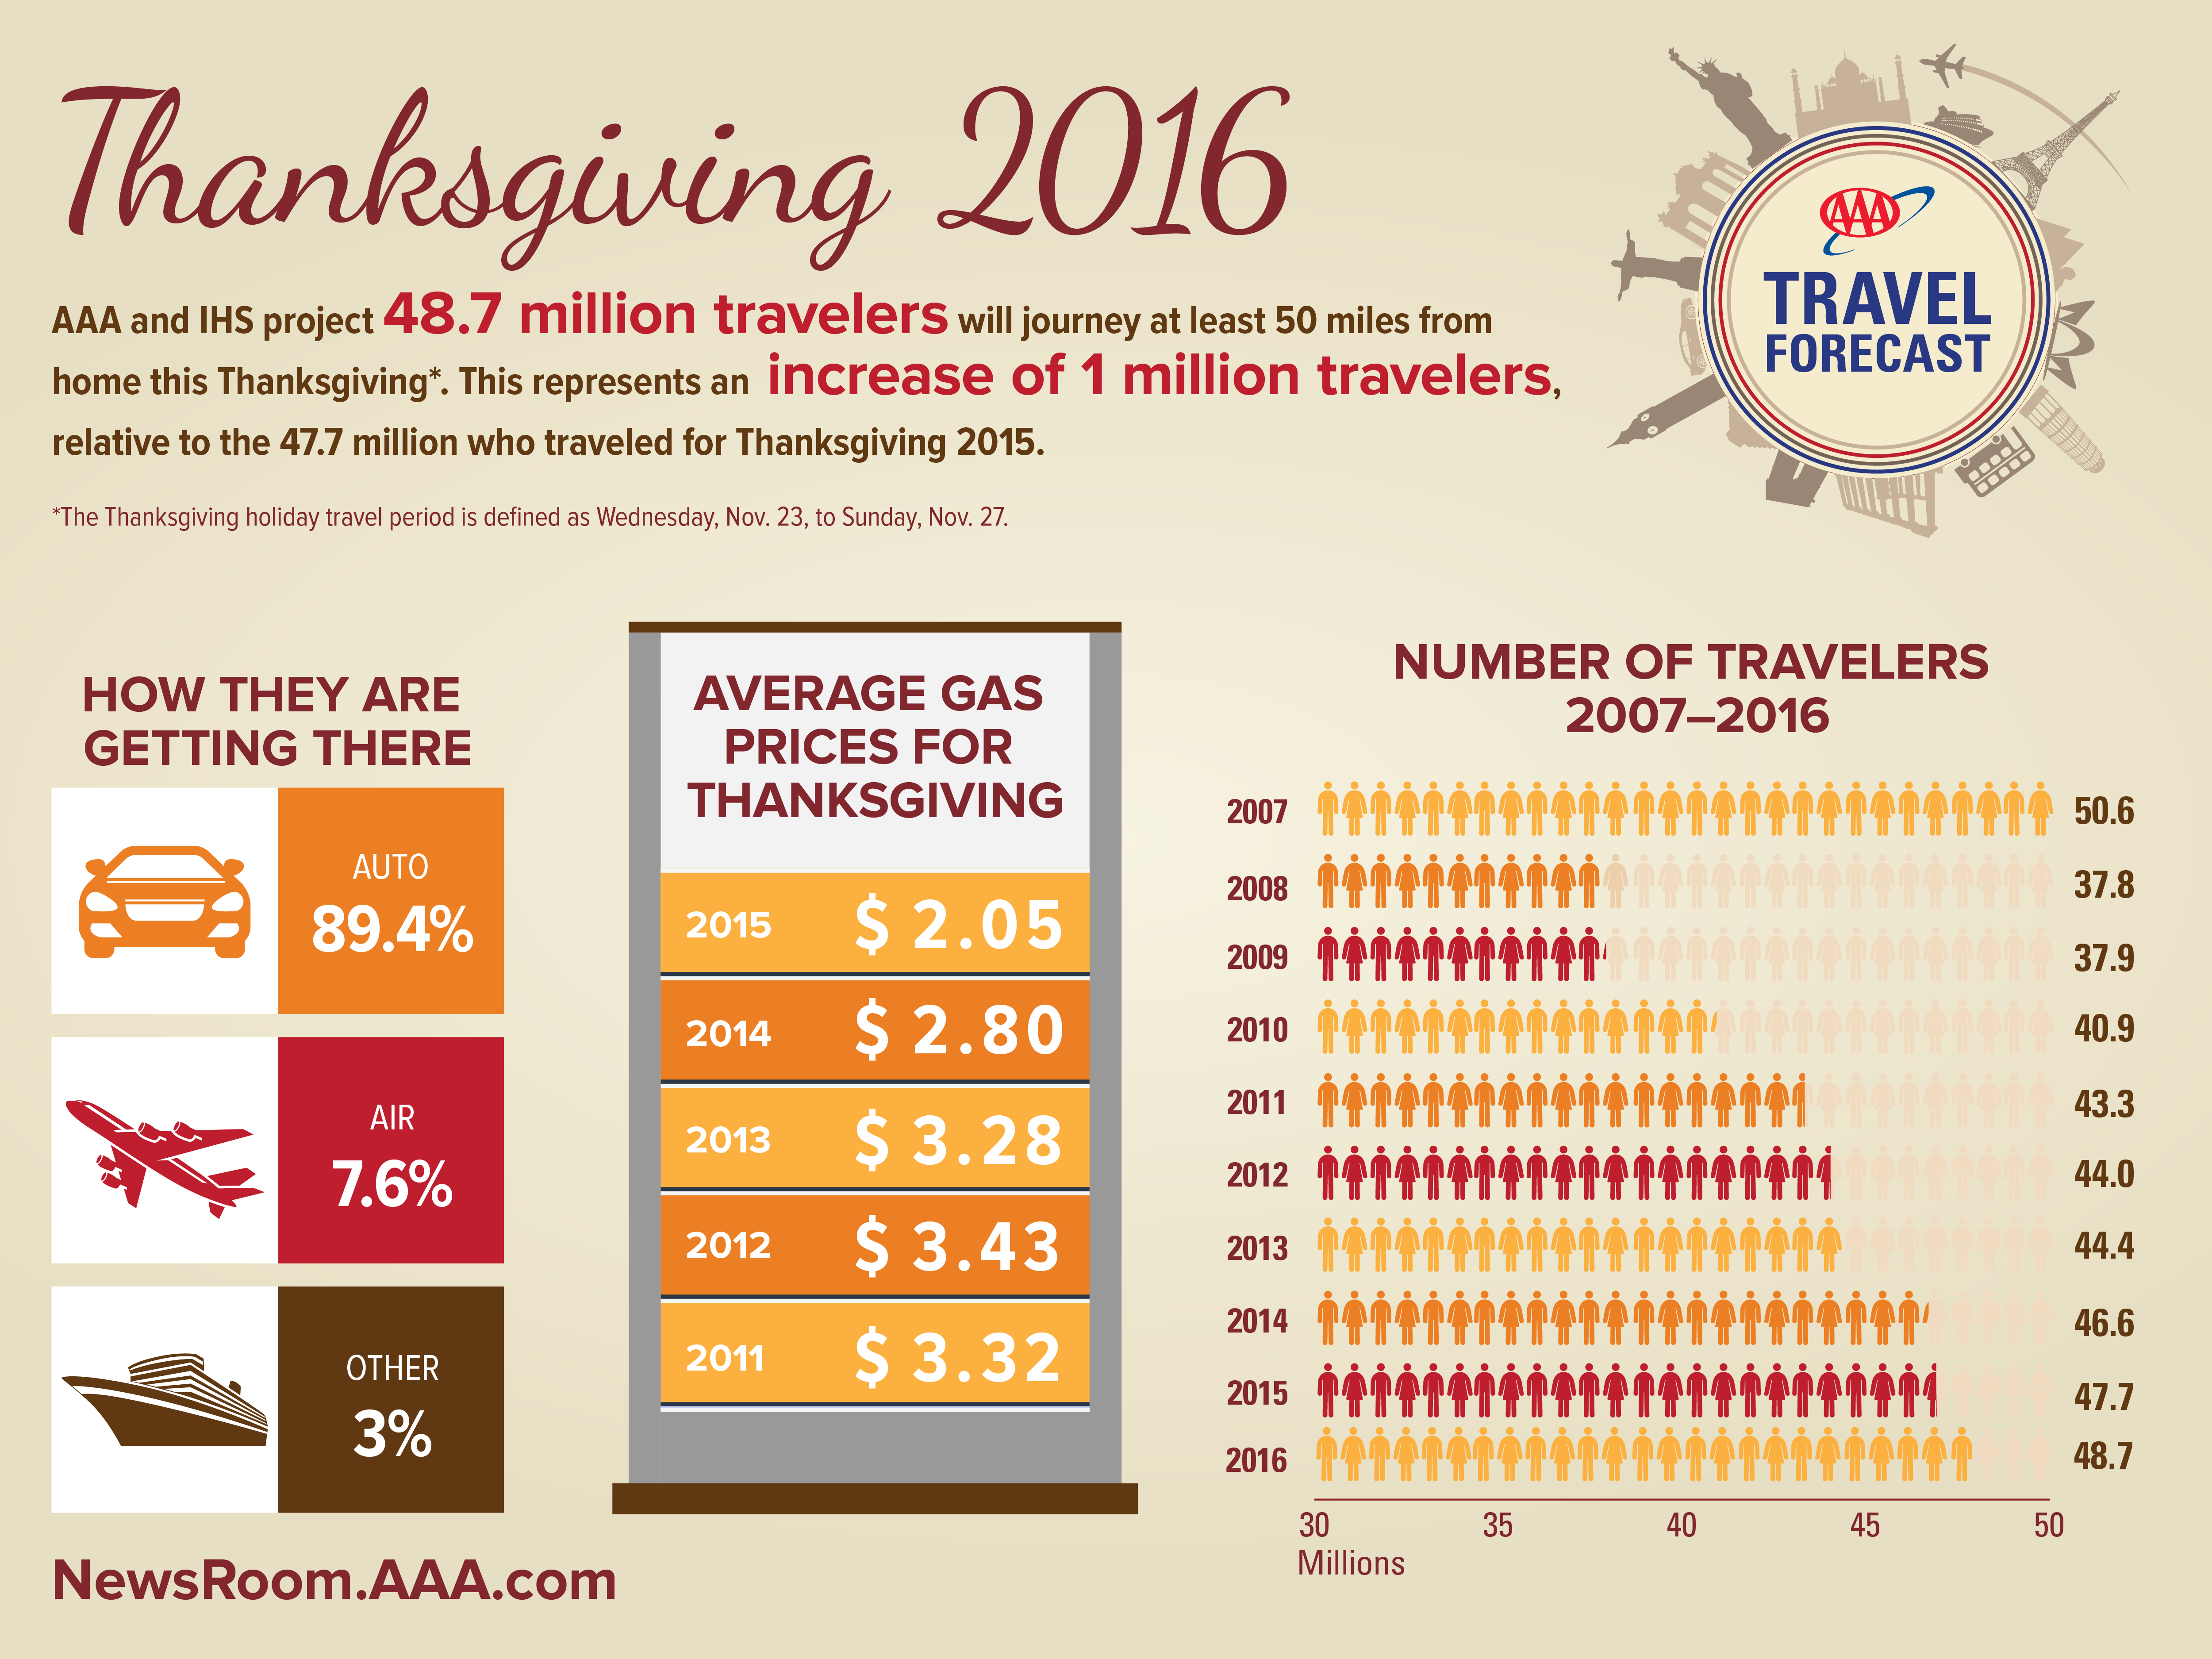 AAA Travel Forecast: Thanksgiving 2016